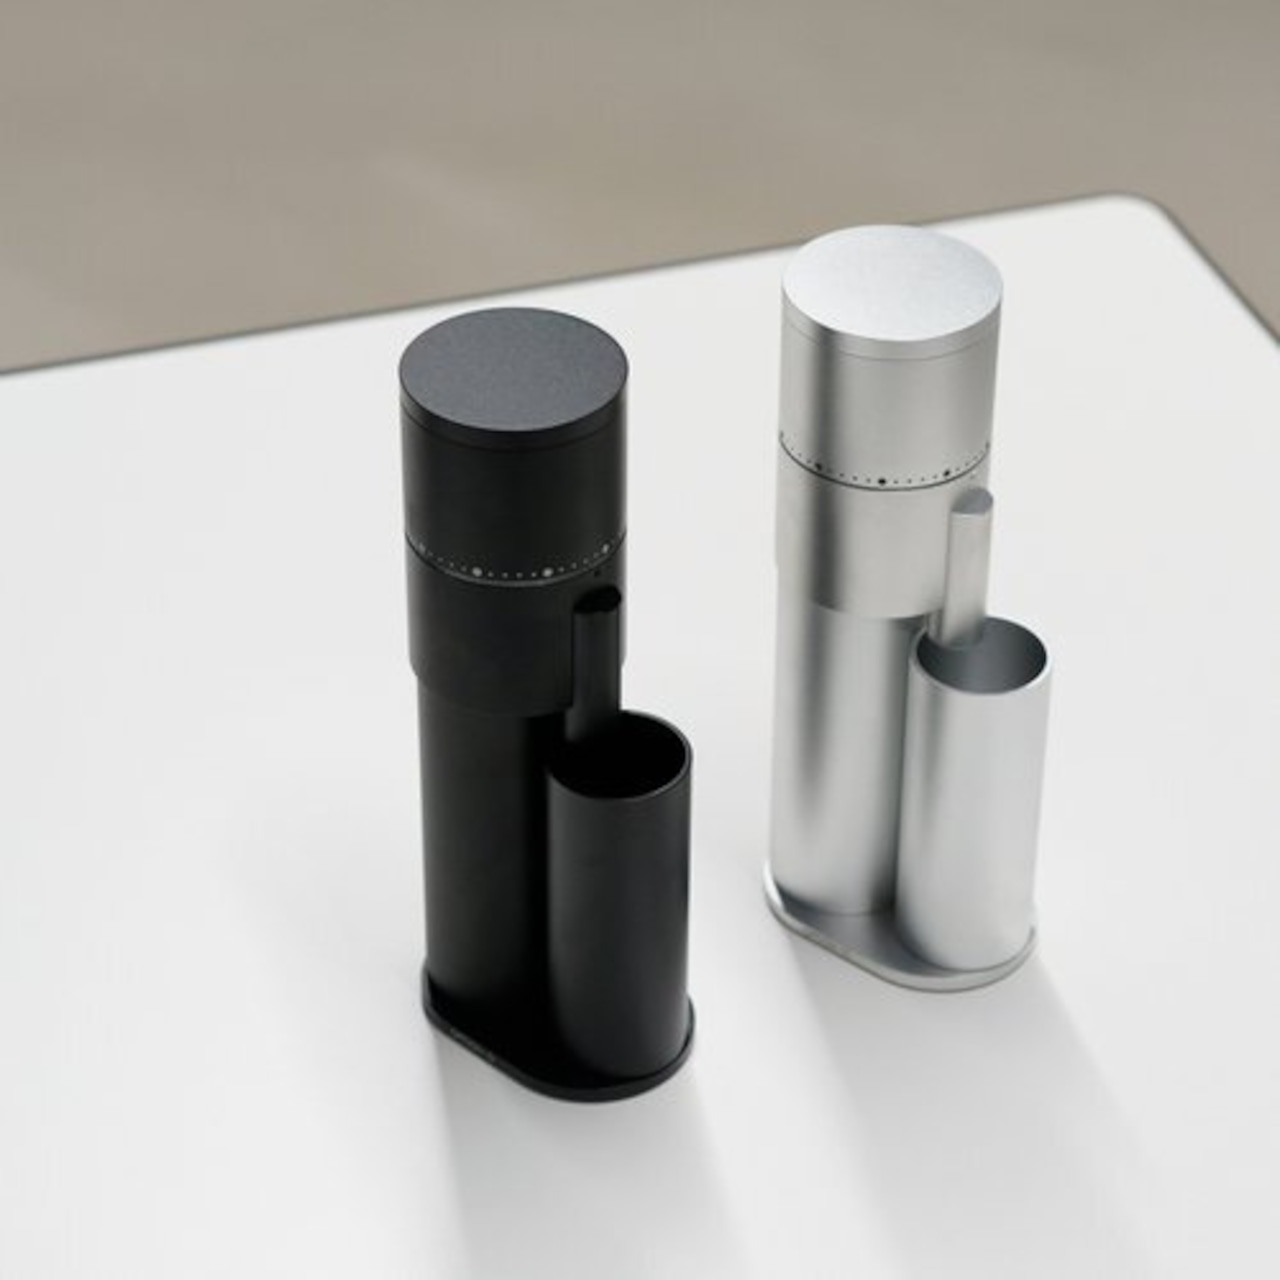 OPTION-O LAGOM mini 】- compact electric coffee grinder - | NEW VALLEY